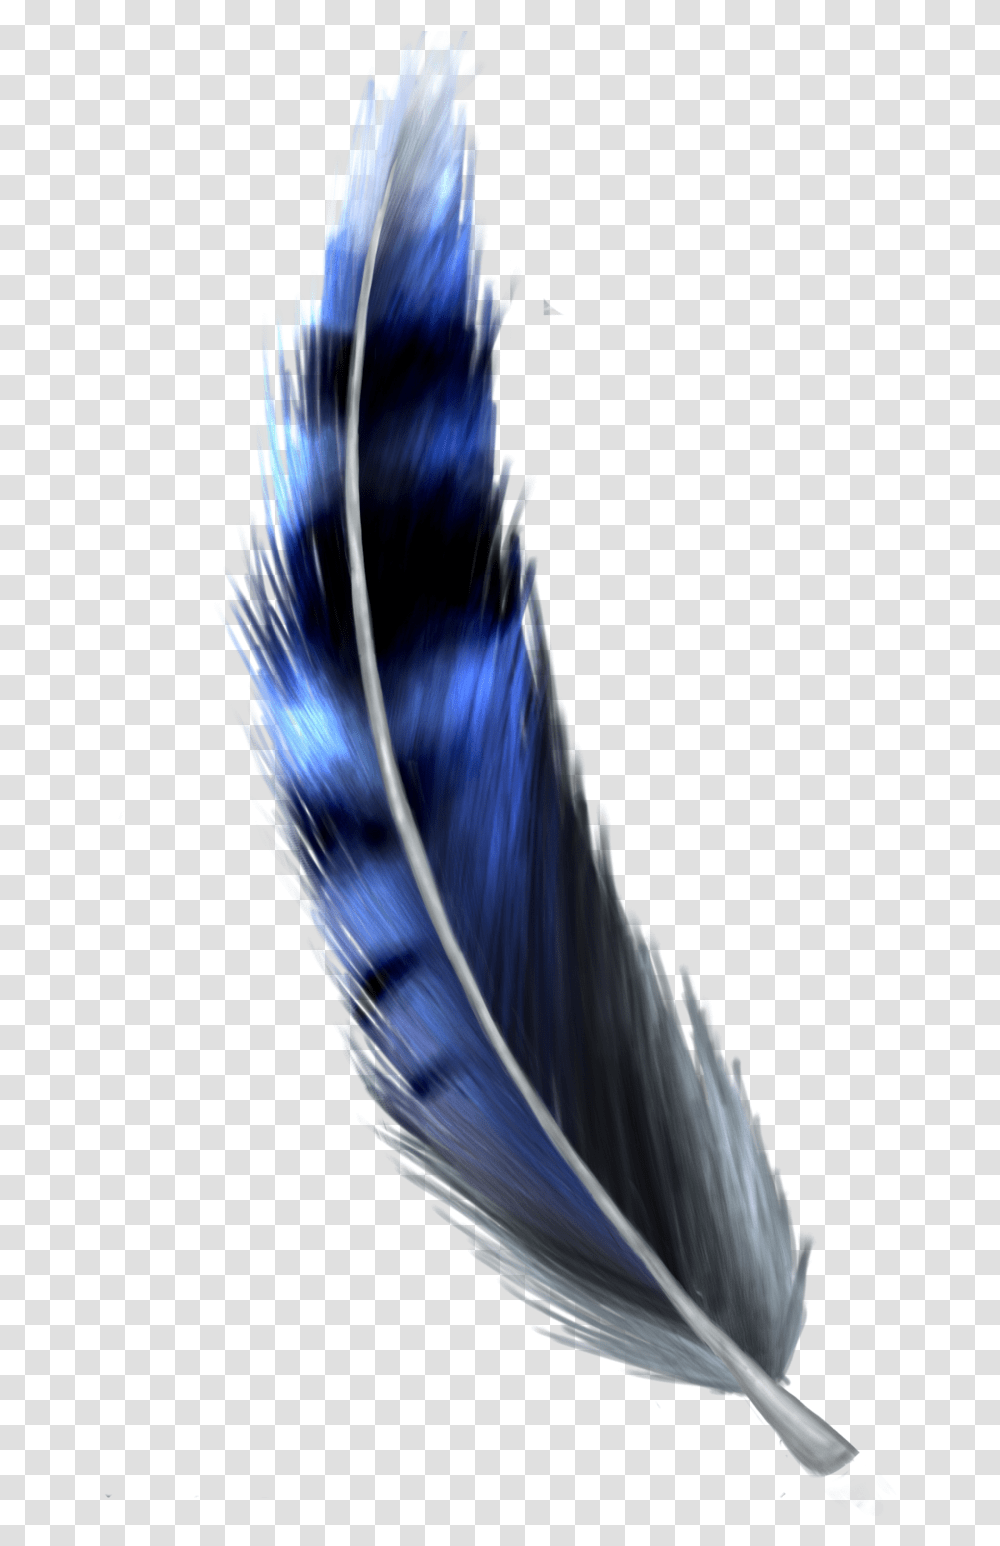 Download Hd Jay Feather Blue Jay Feather Blue Jay Feather, Bird, Animal, Lighting, Graphics Transparent Png